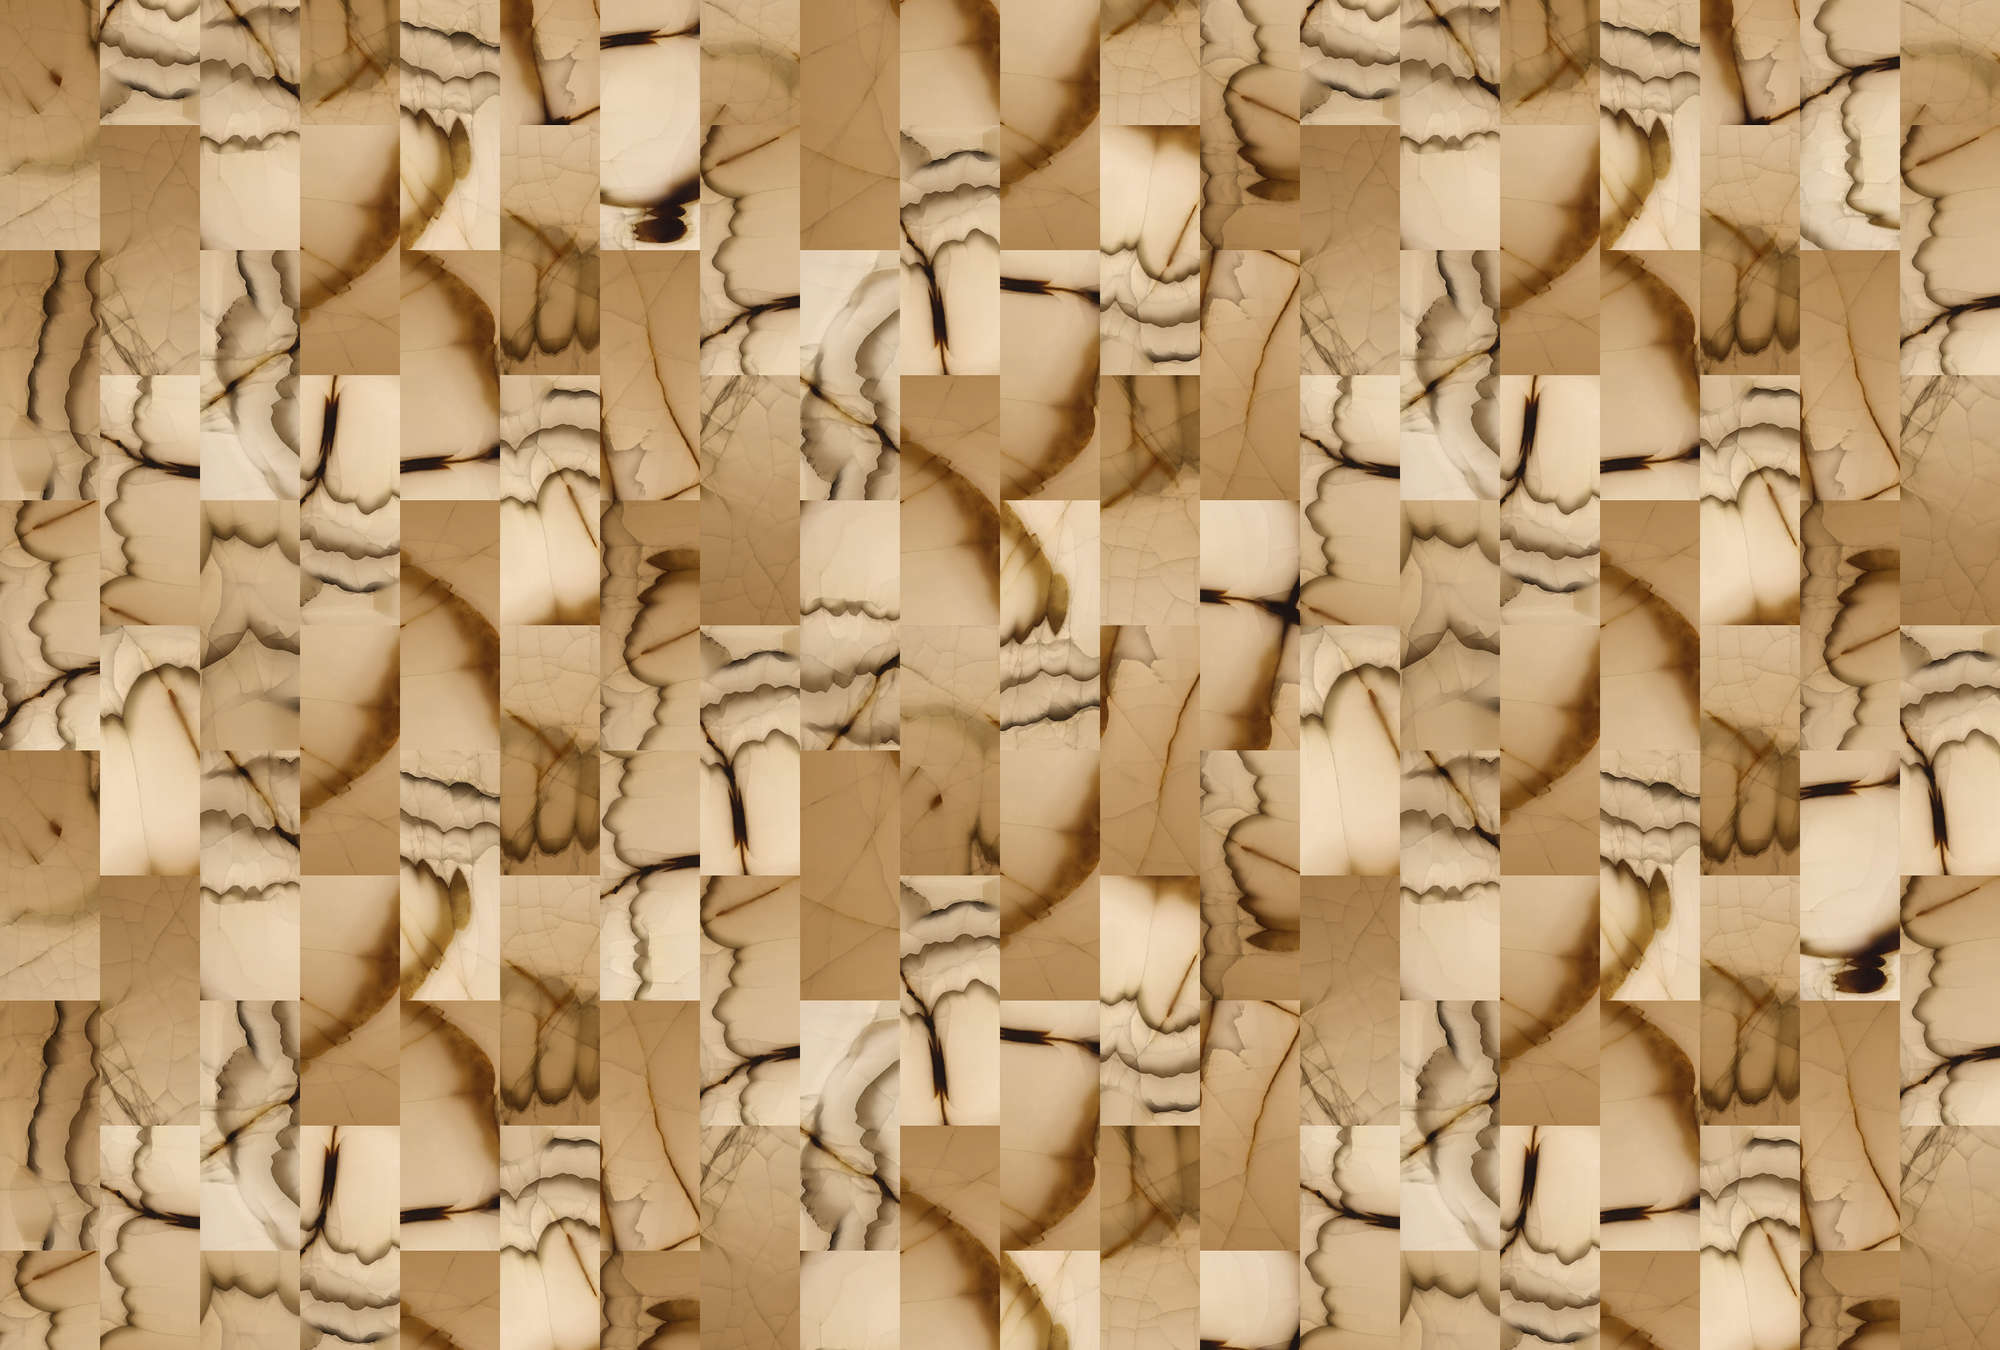             Cut stone 1 - Photo wallpaper with stone look abstract - Beige, Brown | Pearl smooth non-woven
        